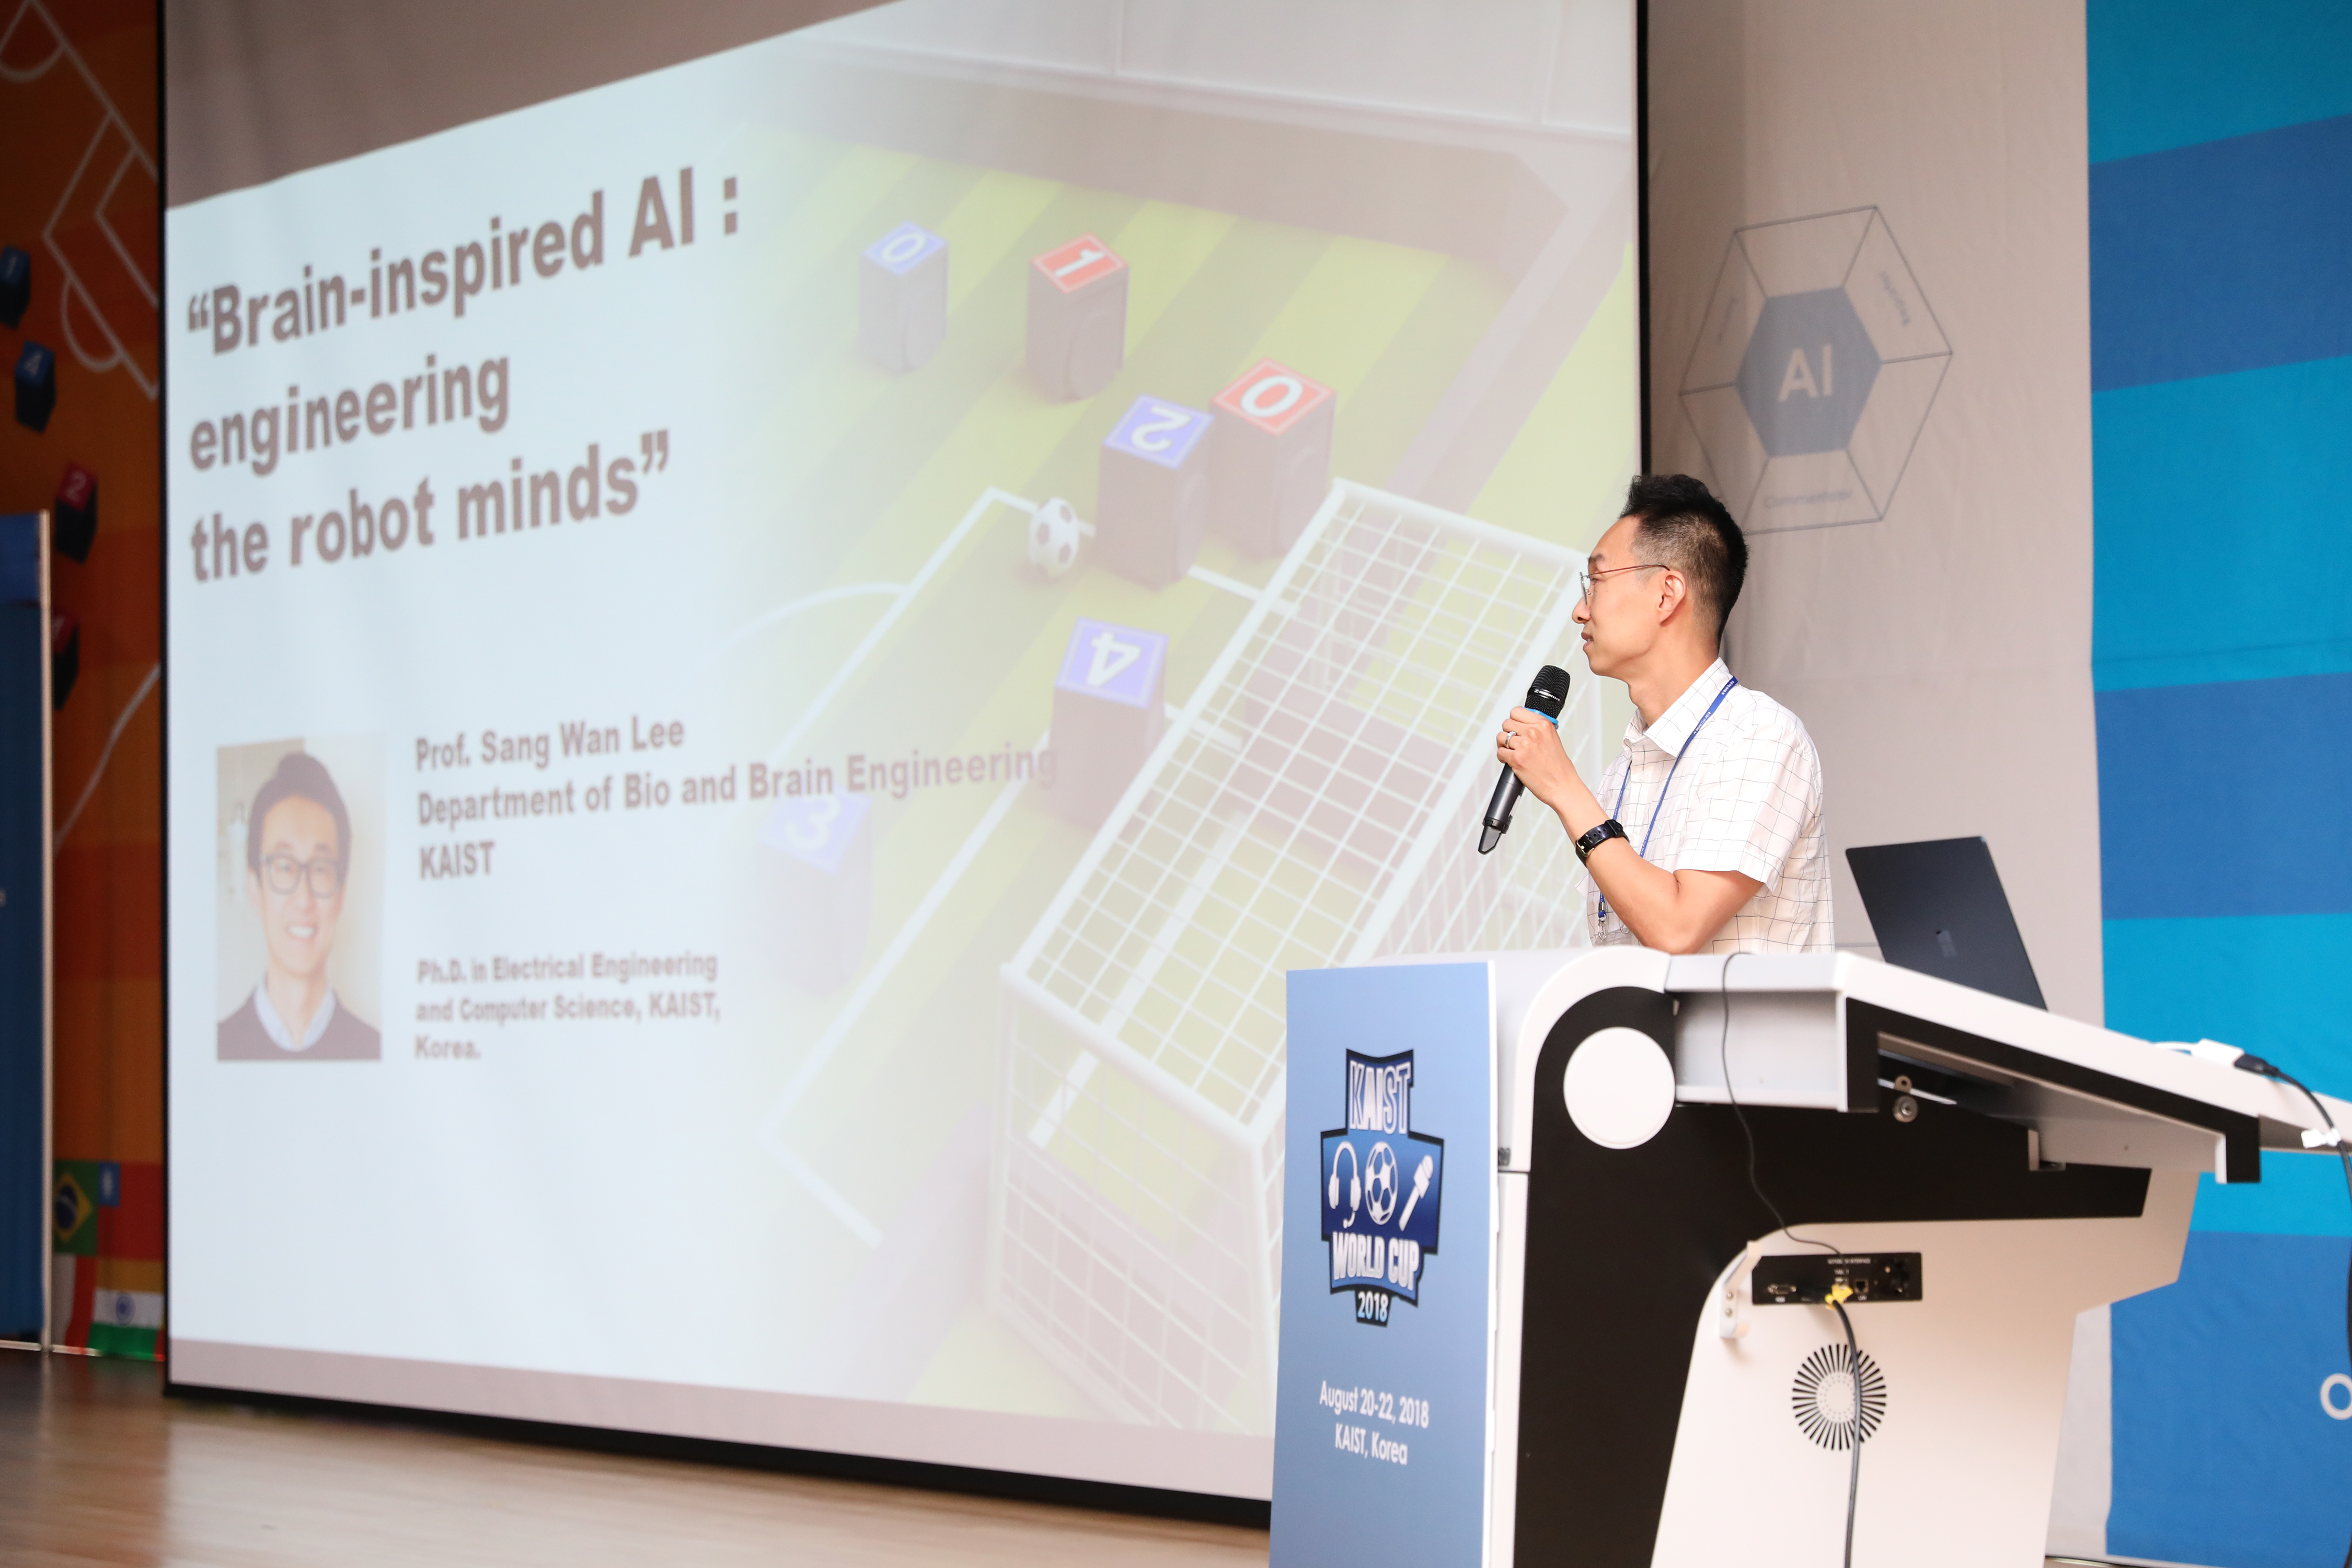 Lecture on AI Flagship : Brain-inspired AI: engineering the robot minds (by Prof. Sangwan Lee; Department of Bio and Brain Engineering, KAIST)